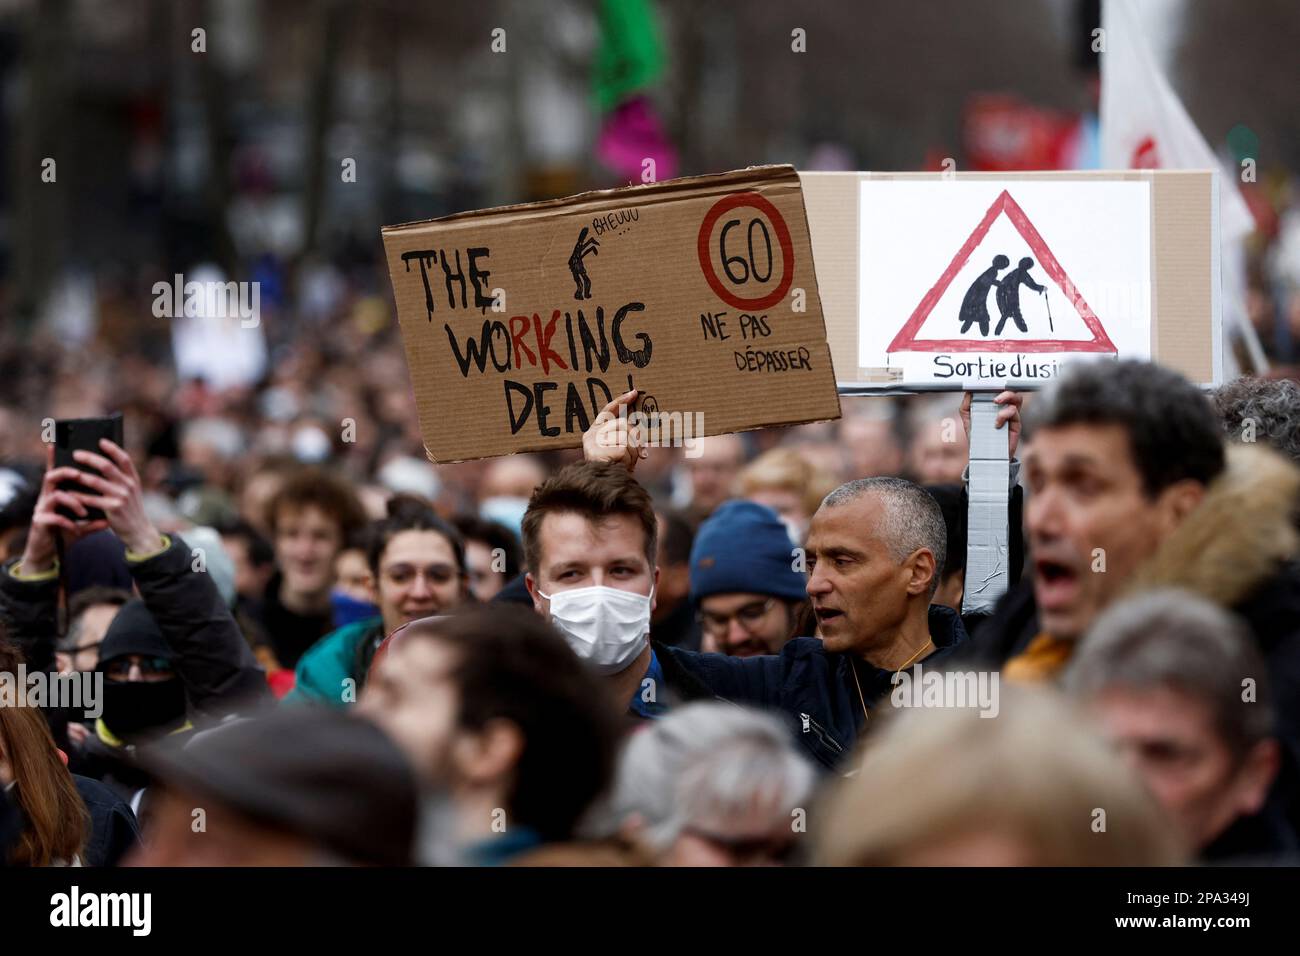 Demonstrators hold placards during a march against the government's pension reform plan in Paris, France, March 11, 2023.  REUTERS/Benoit Tessier Stock Photo